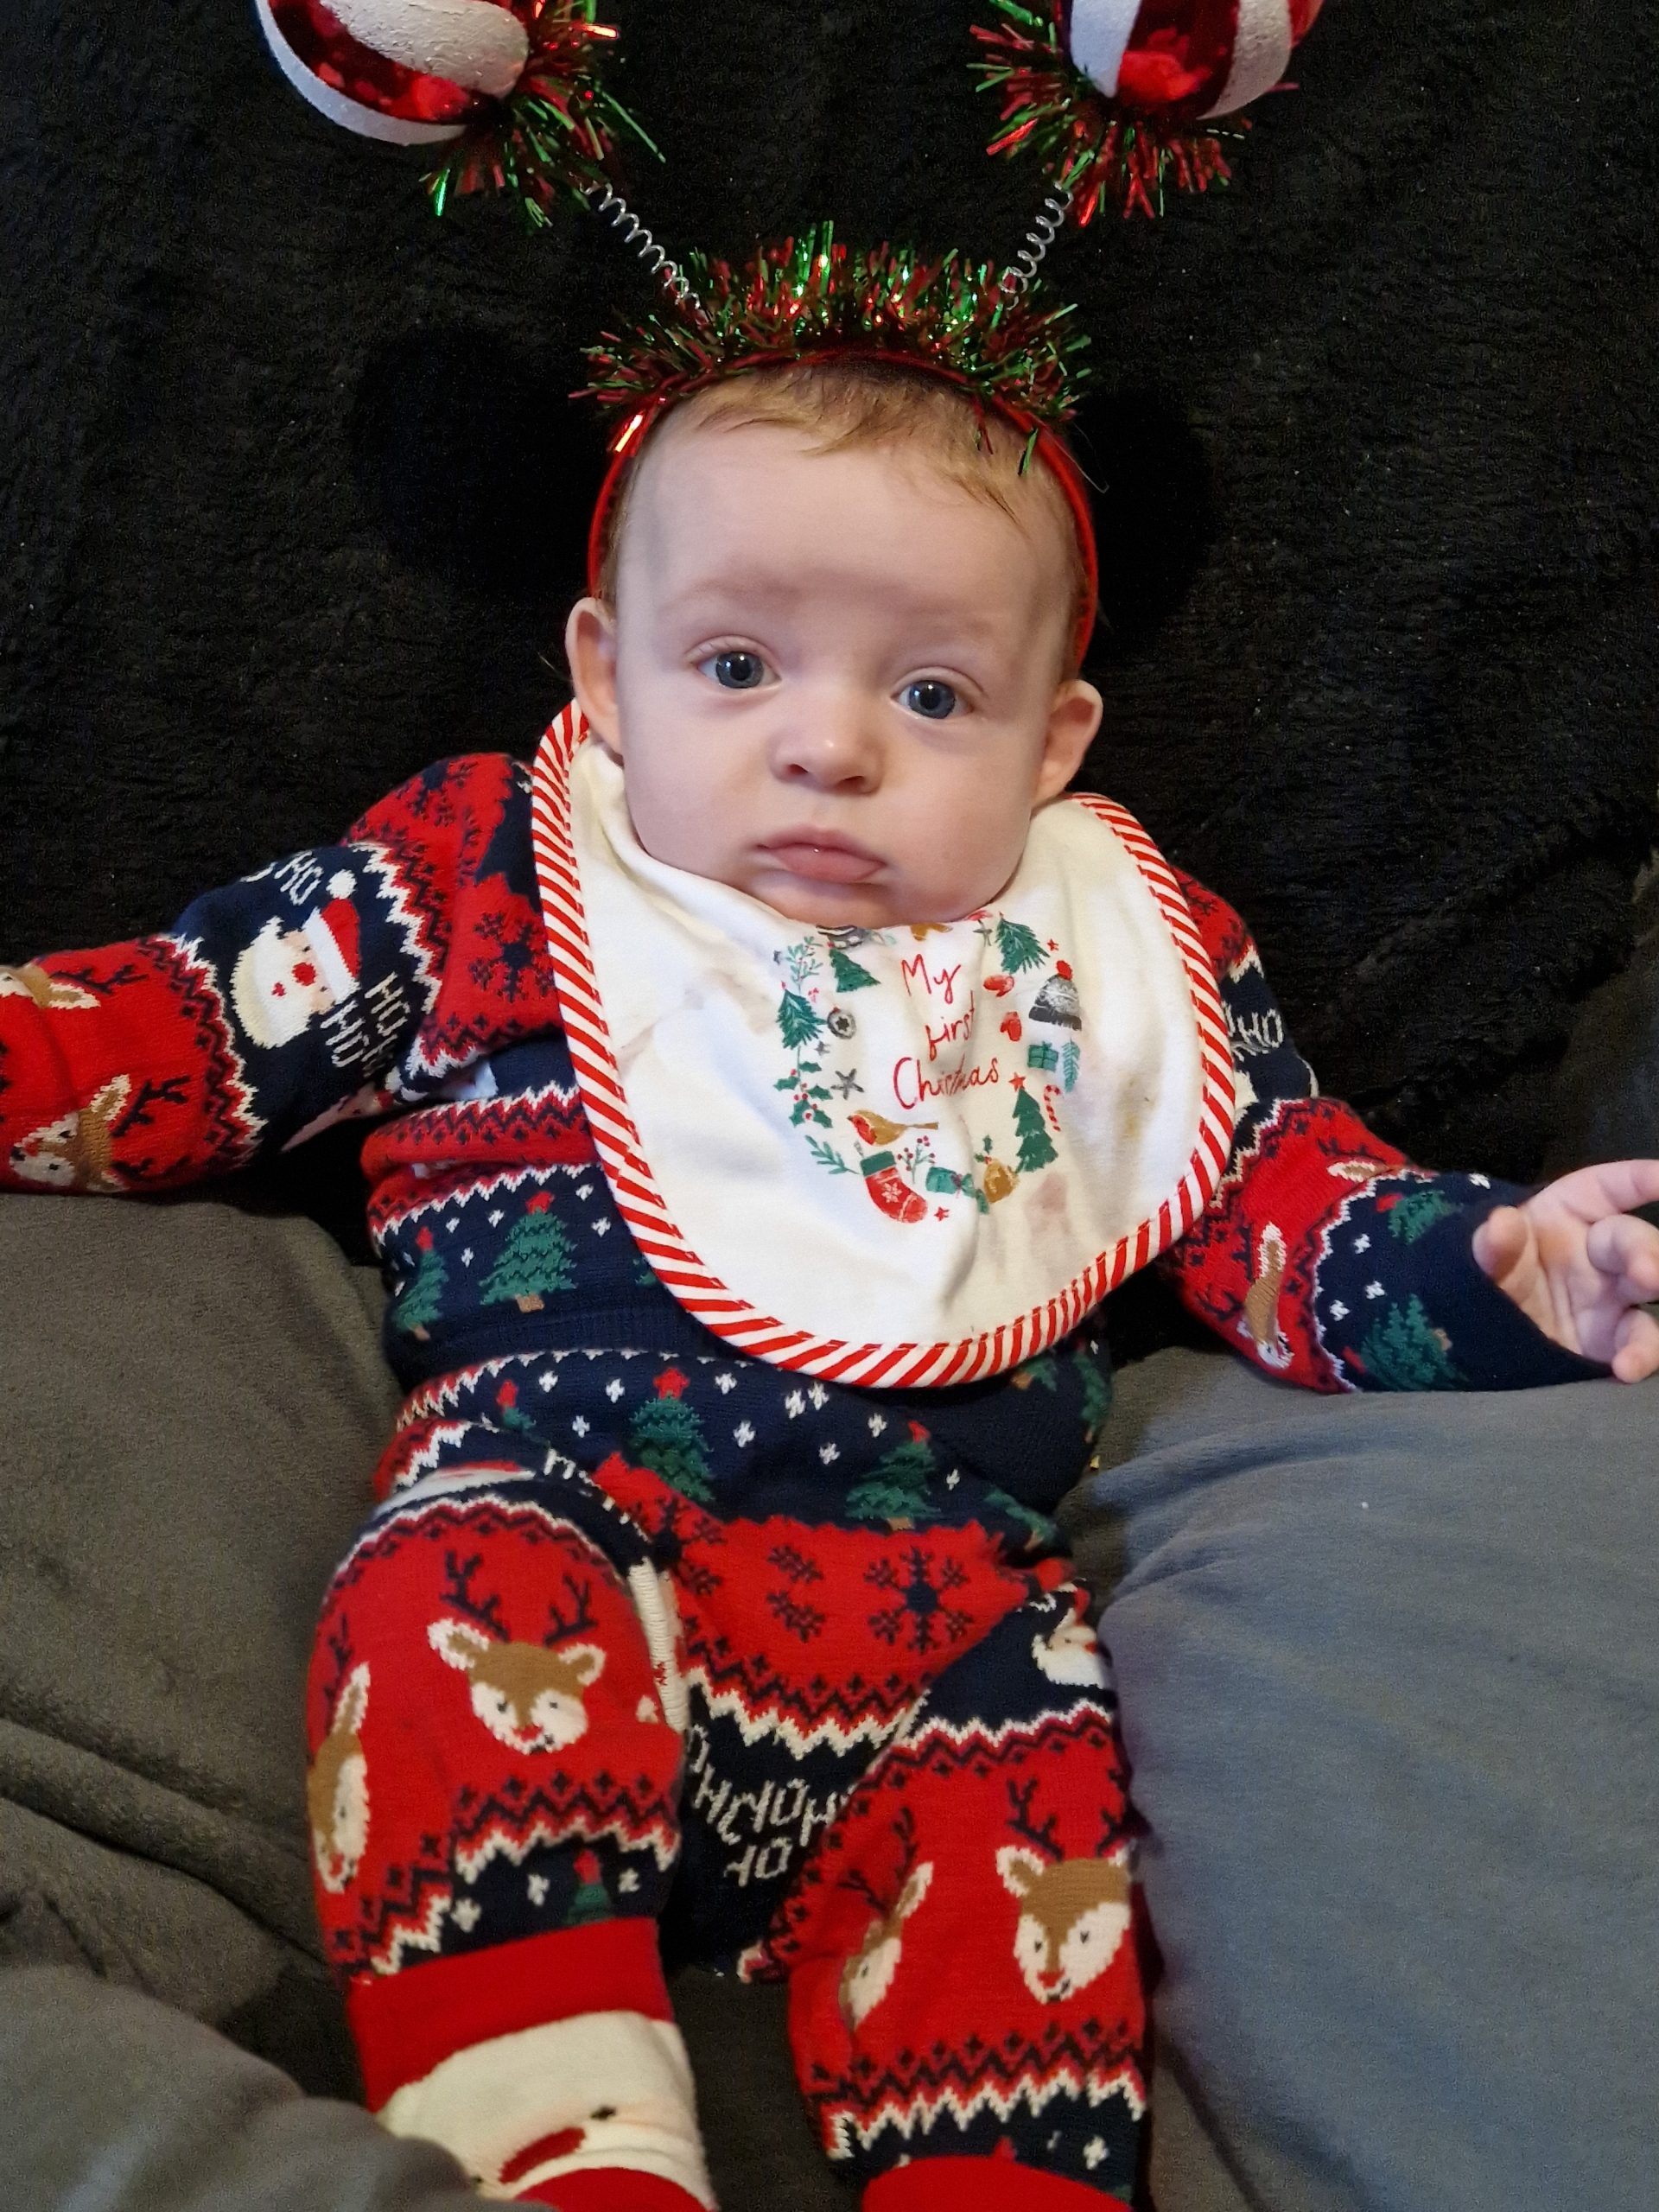 A baby wearing a christmas outfit